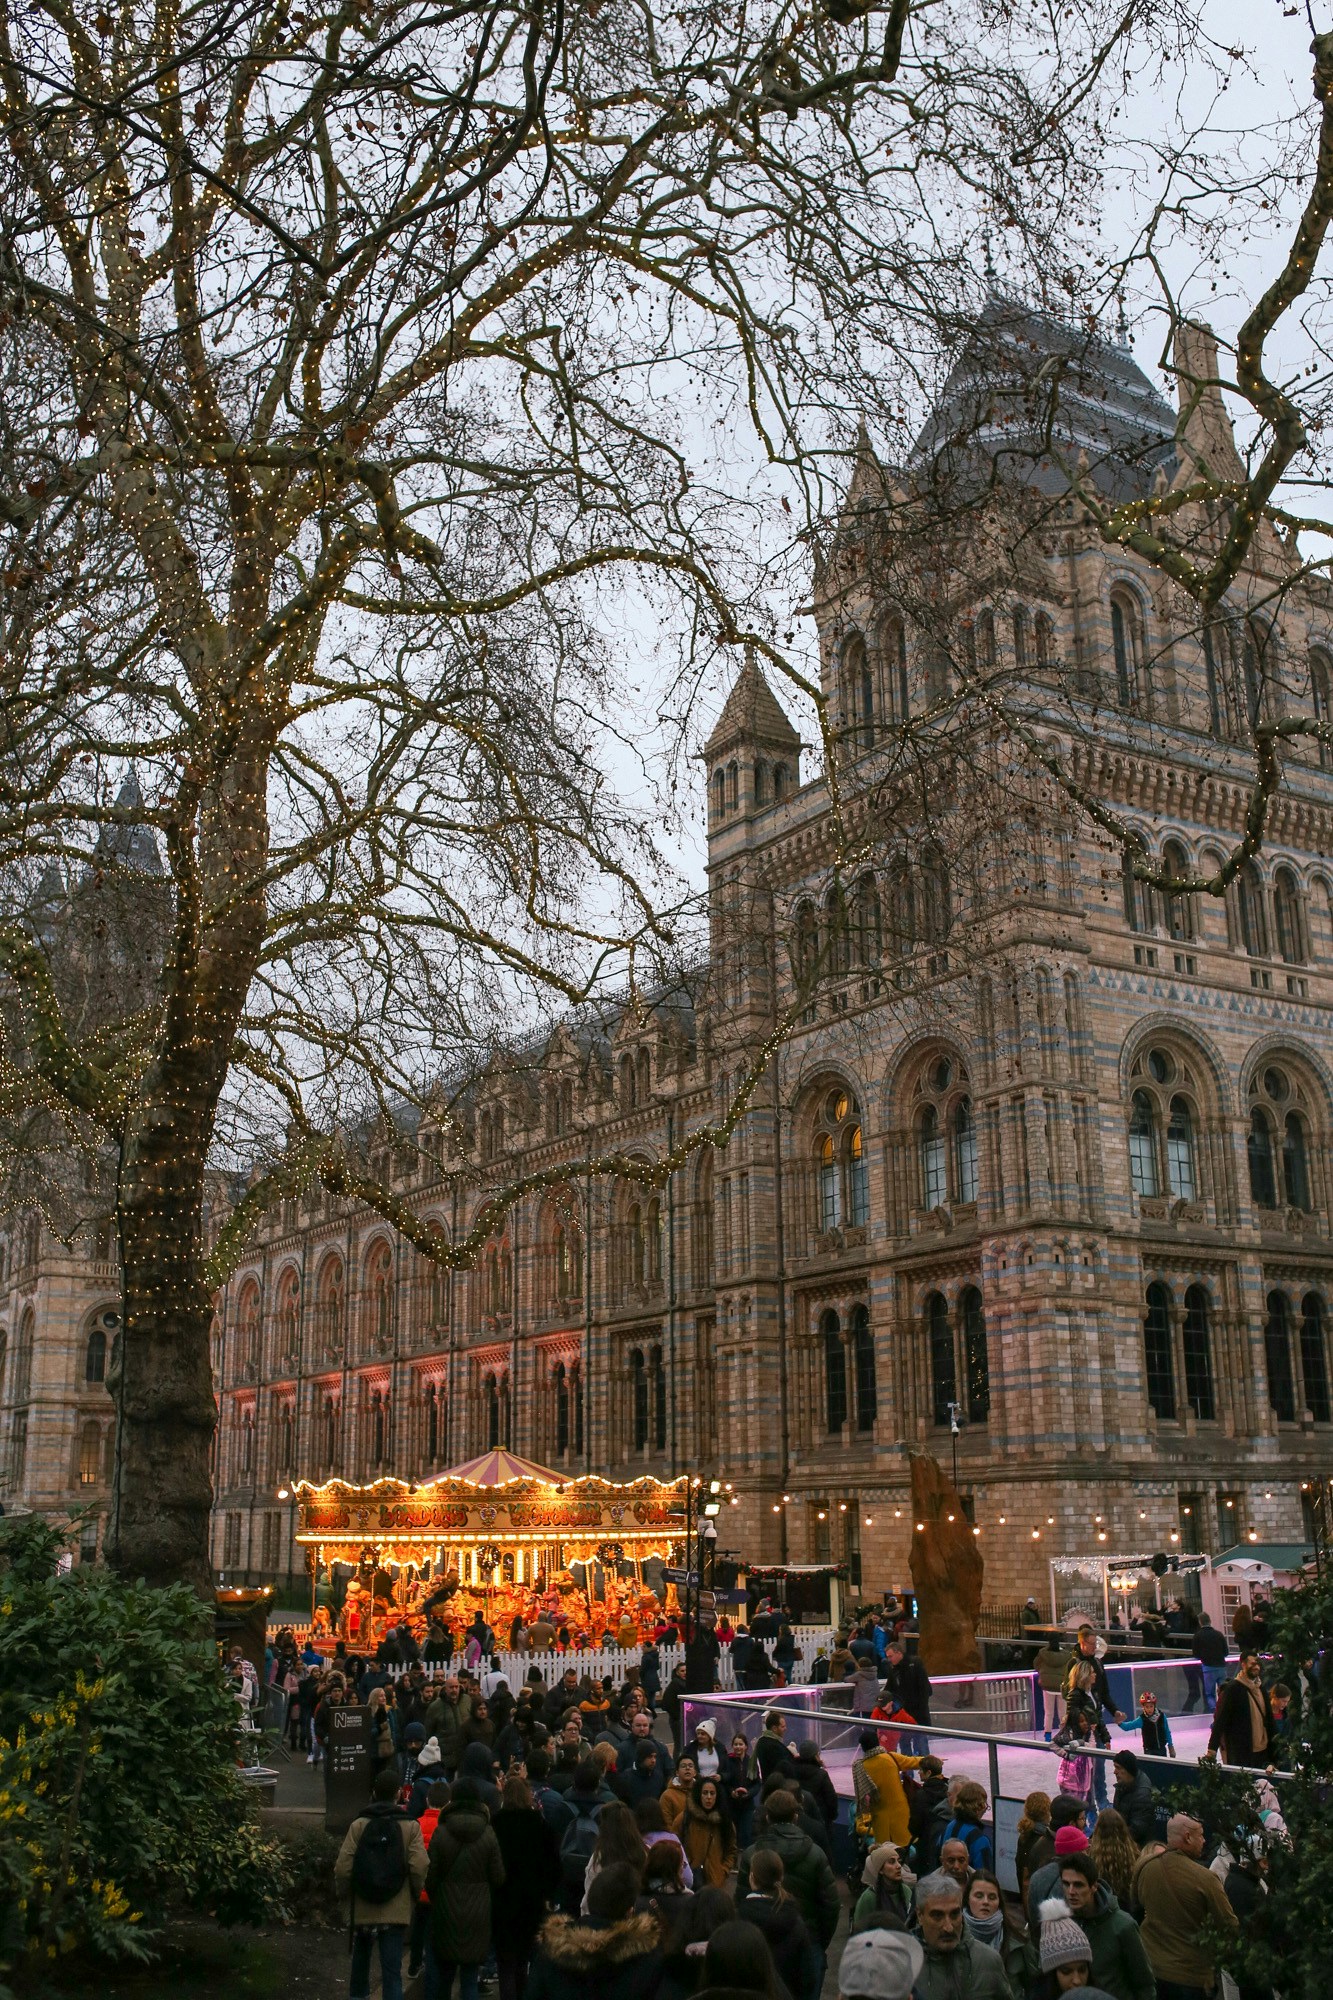 The Natural History Museum in London is a must-see at Christmas time with a carousel, skating rink and fairy lights.